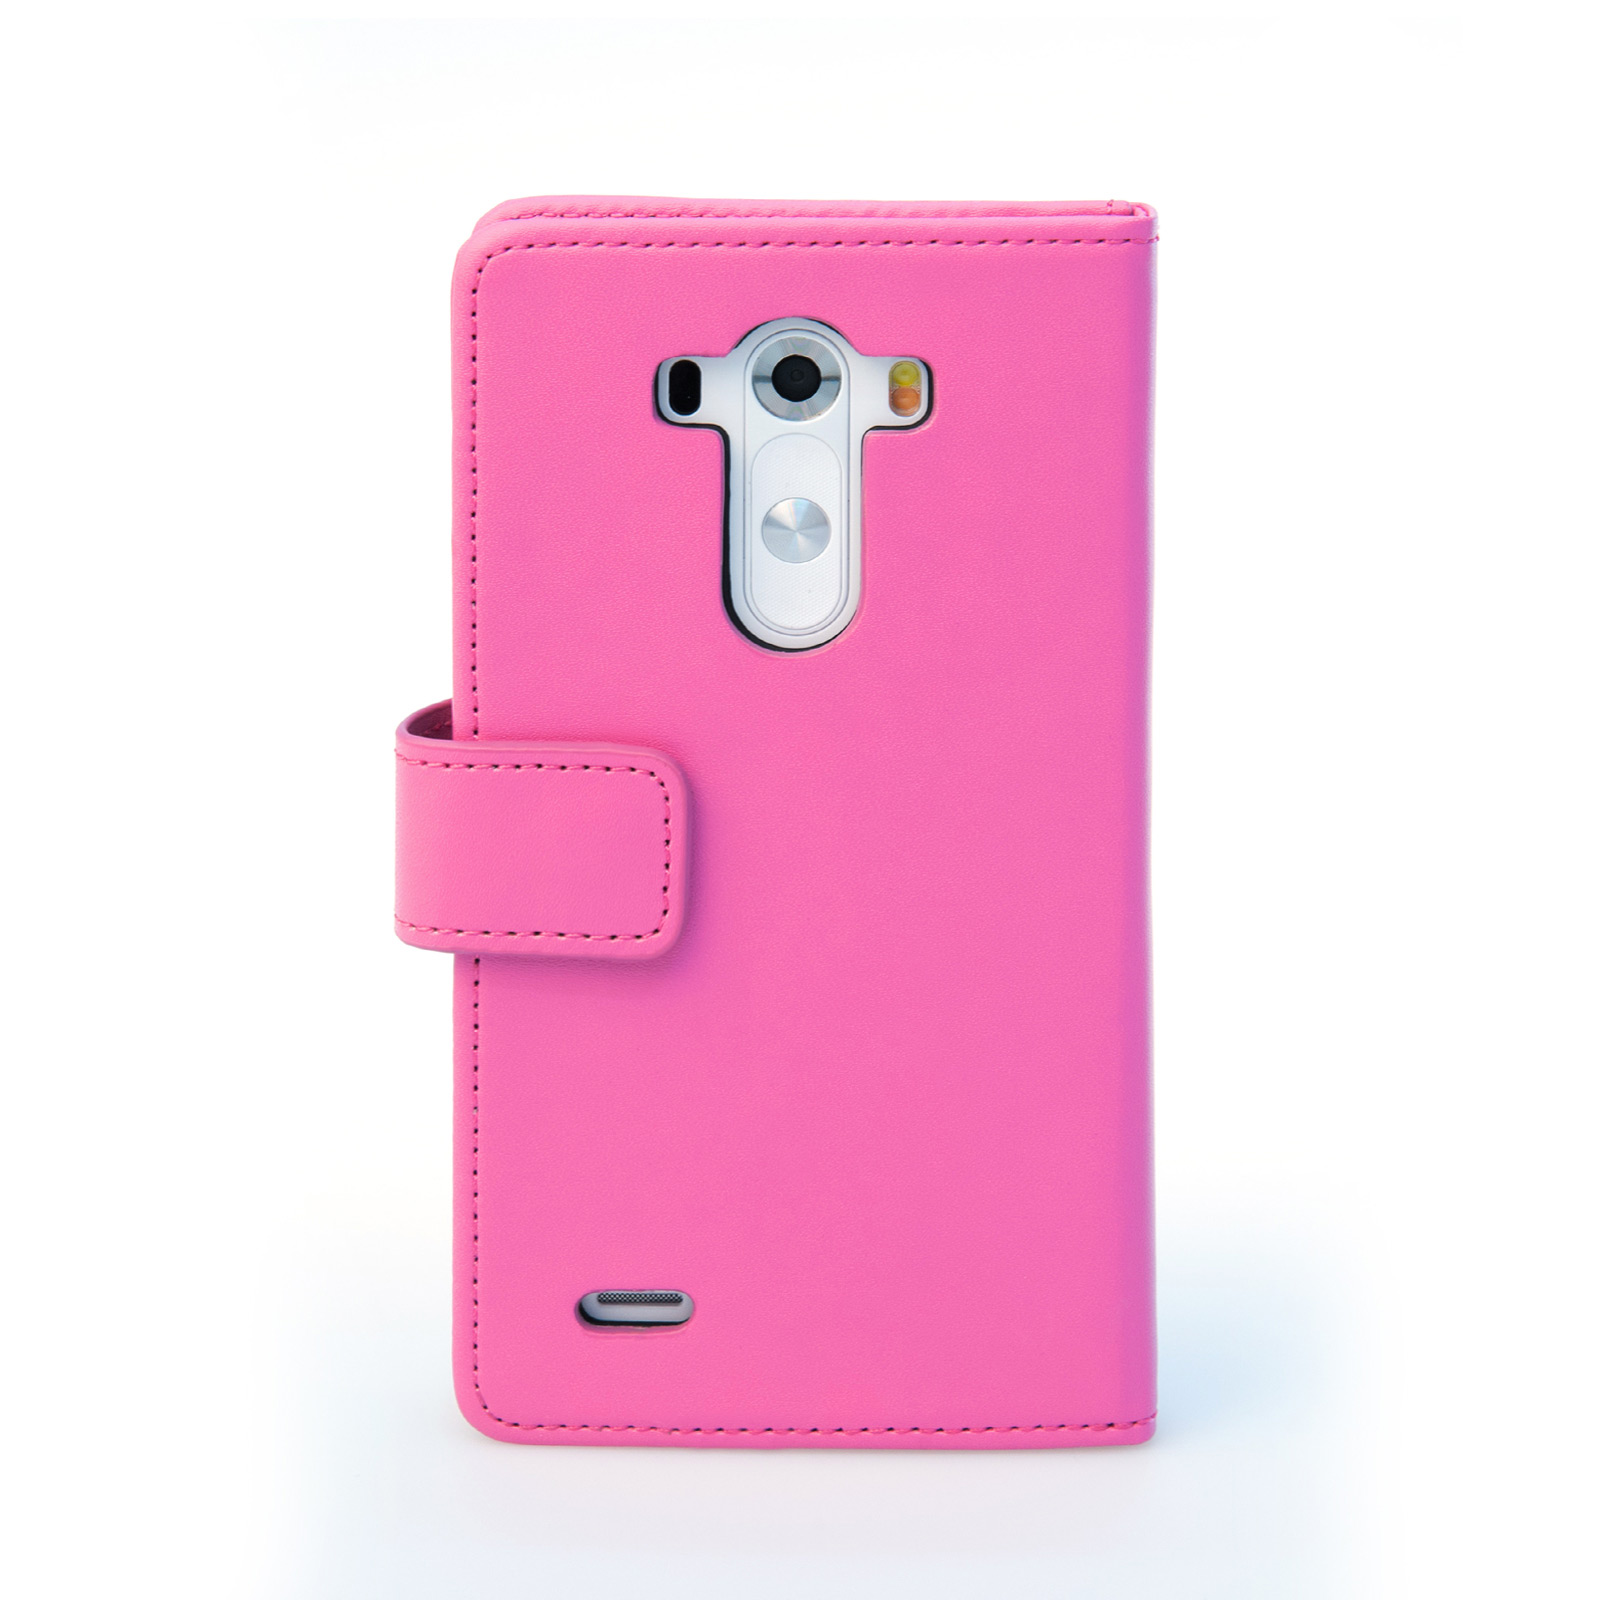 YouSave Accessories LG G3 Leather-Effect Wallet Case - Hot Pink